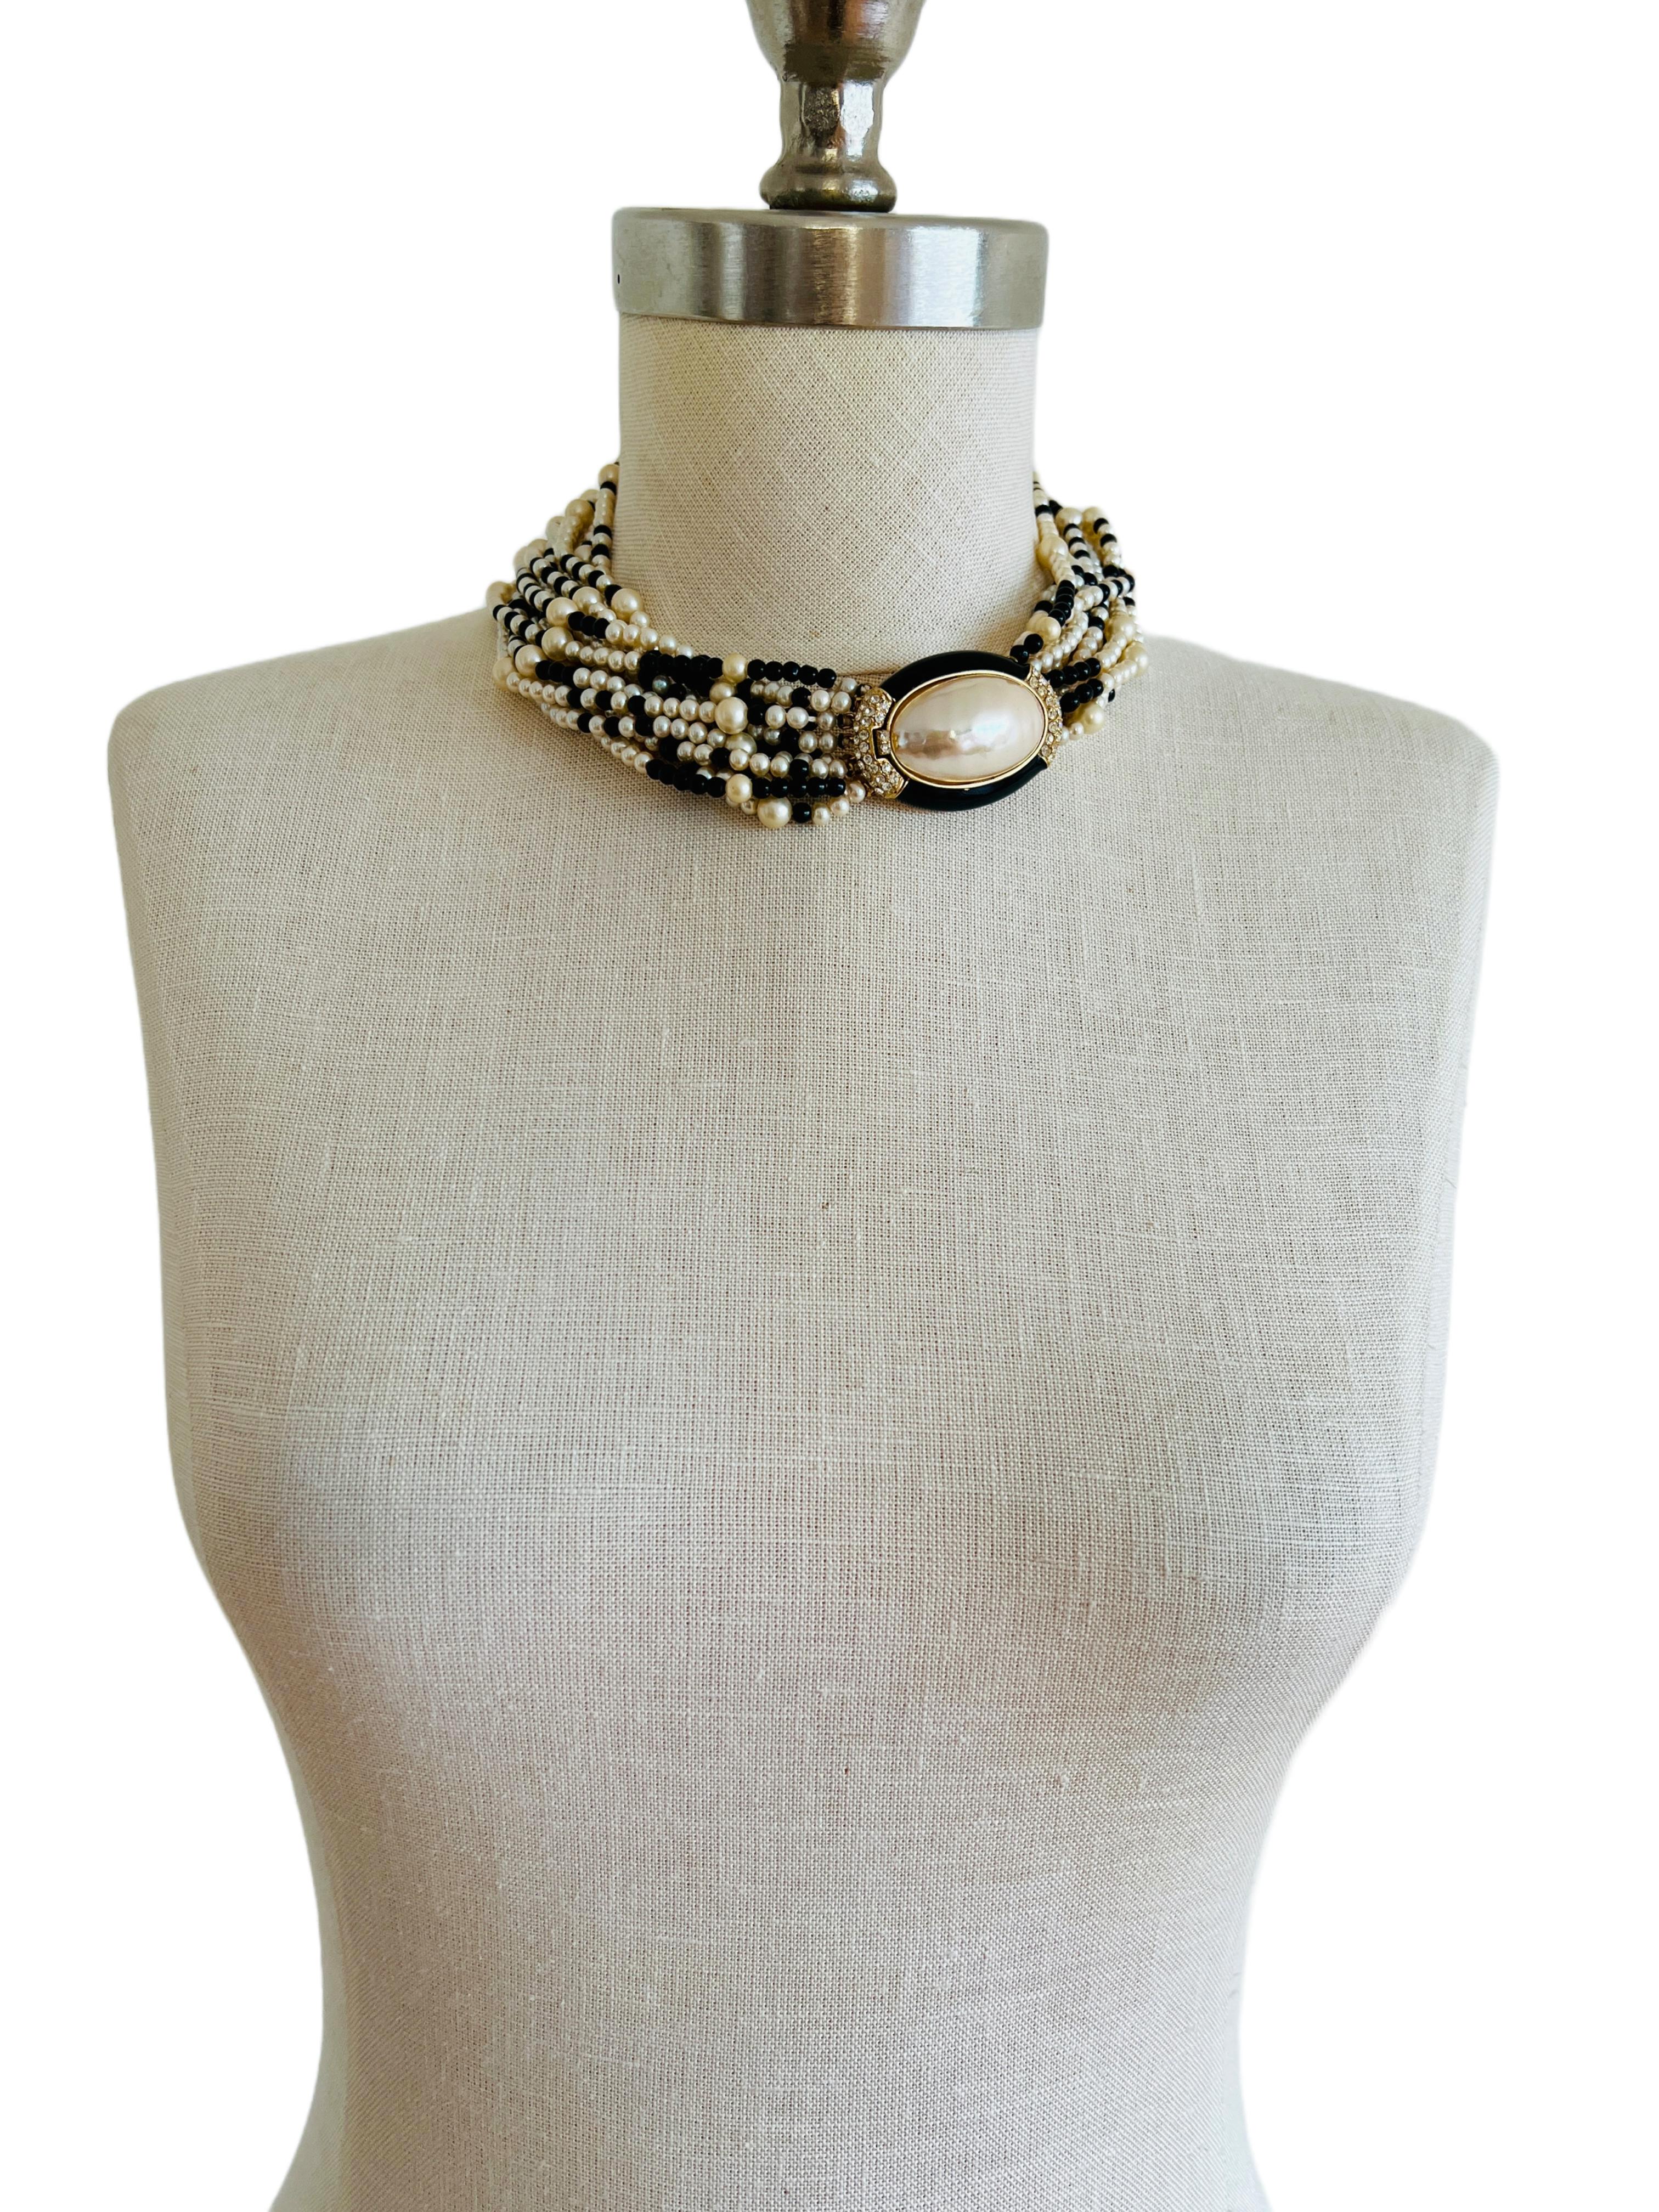 Ciner Beaded Black Gold Faux Pearl Choker Twisted Torsade Necklace Earring Set In Good Condition For Sale In Sausalito, CA